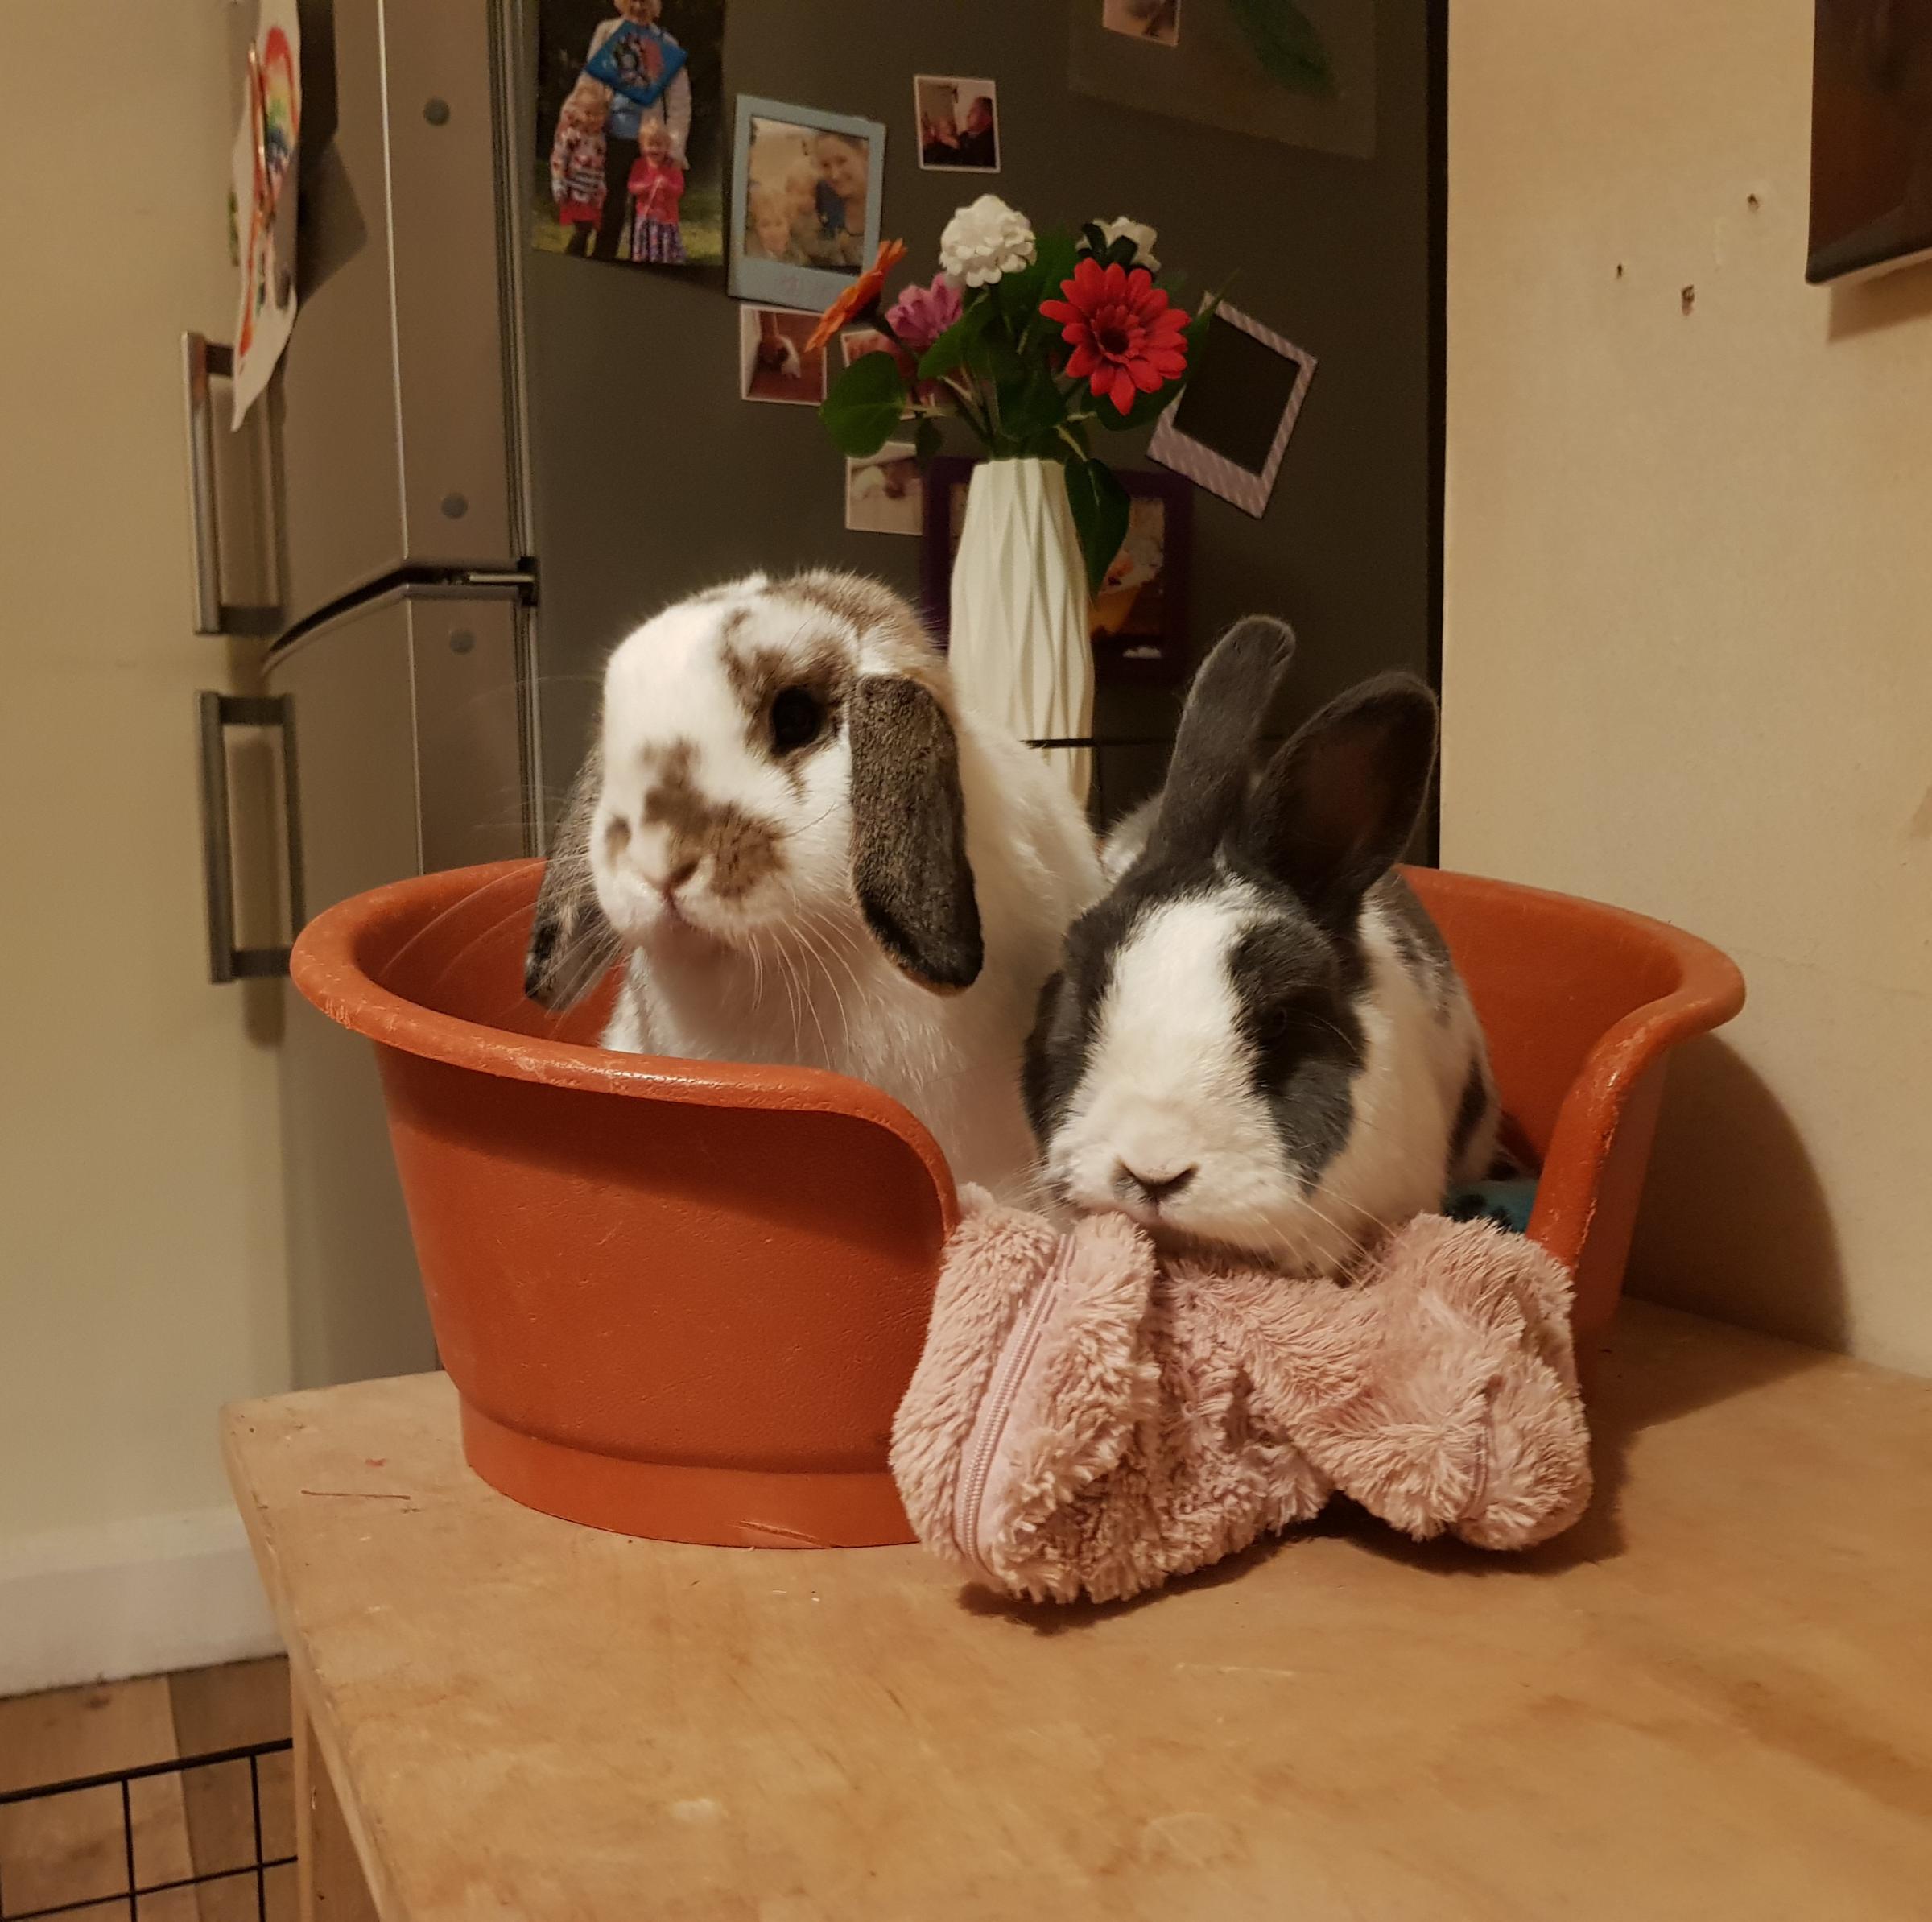 Hereford Times: 'Are you going to the fridge? Can we have some?'